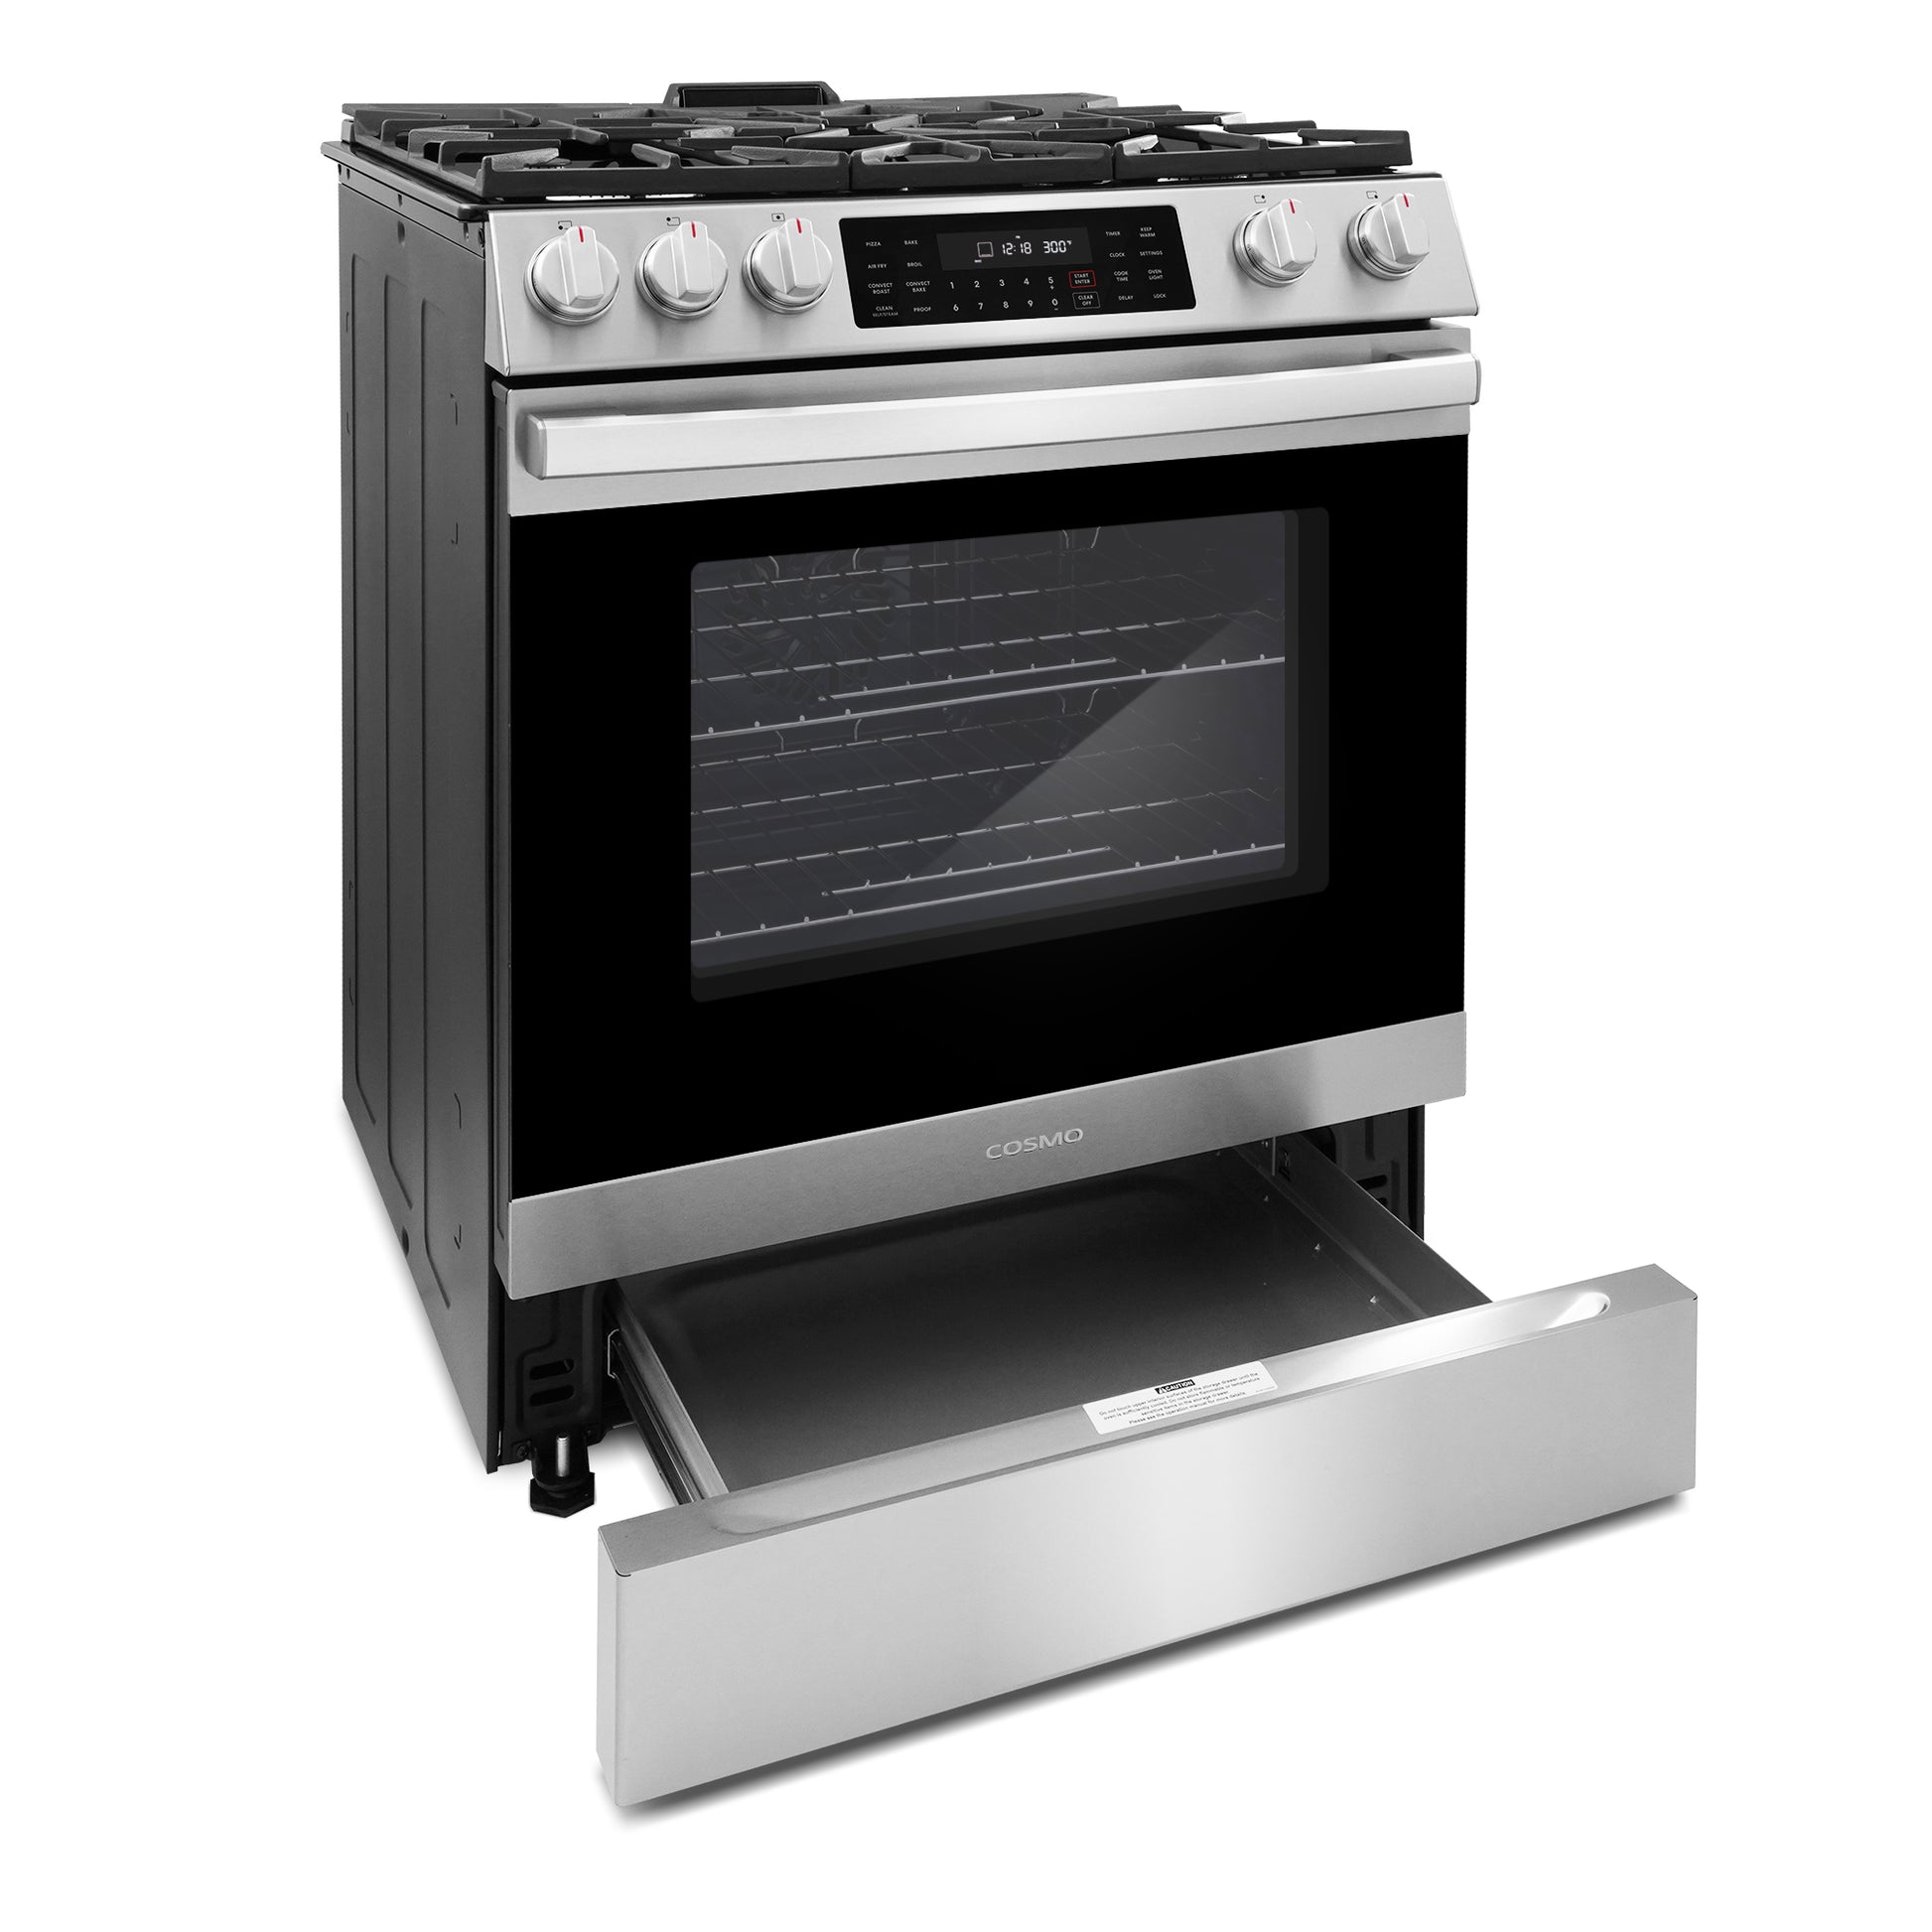 Cosmo Professional Style 30 in. Slide-In Freestanding 6.1 cu. ft. Gas Range in Stainless Steel with 5 Sealed Gas Burners and Self Clean Air Fry Oven